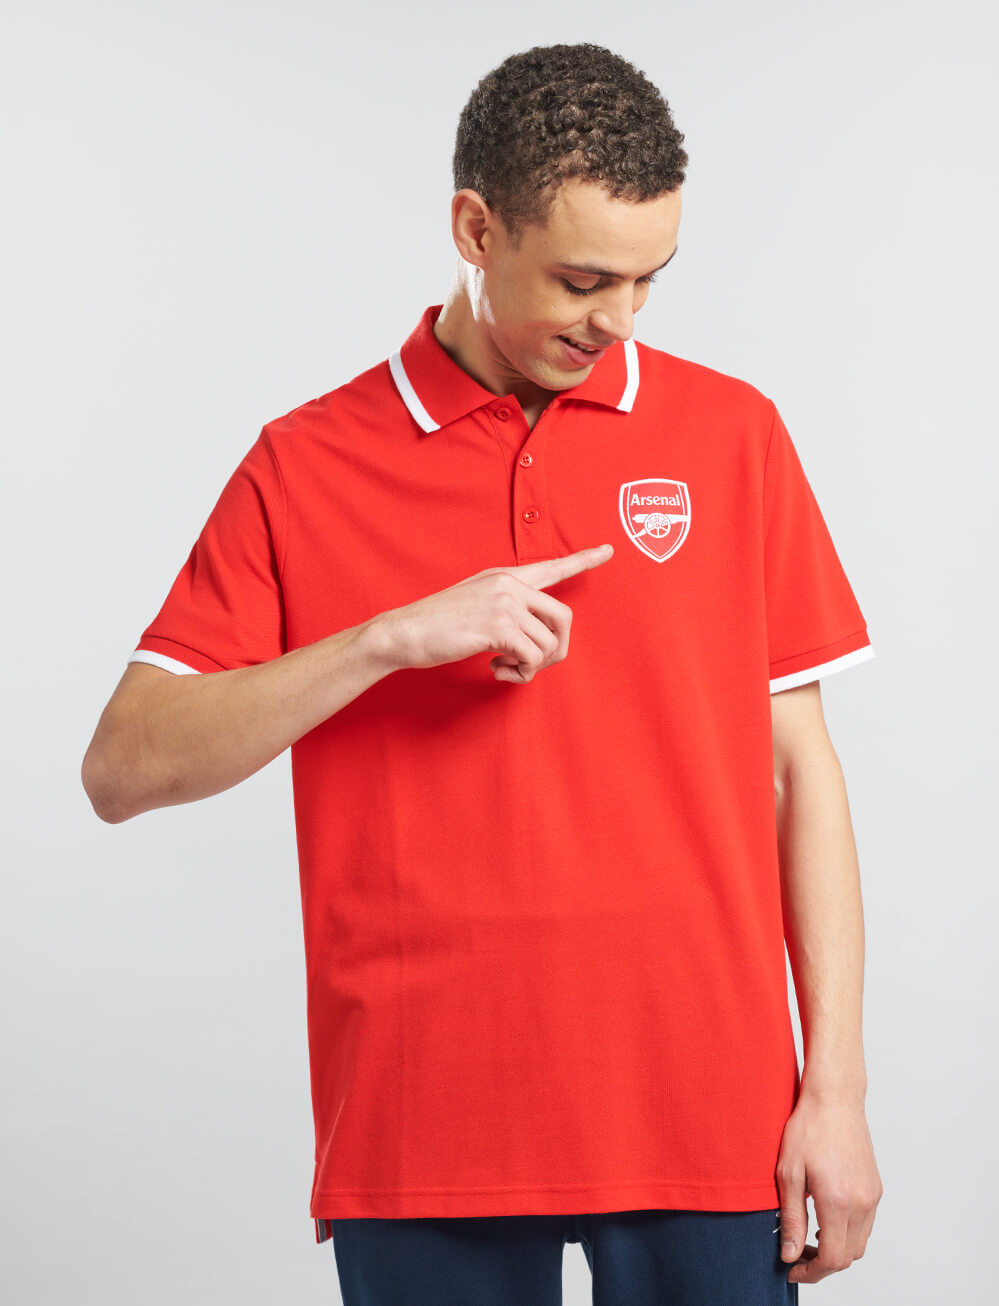 Official Arsenal Tipped Polo - Red - The World Football Store